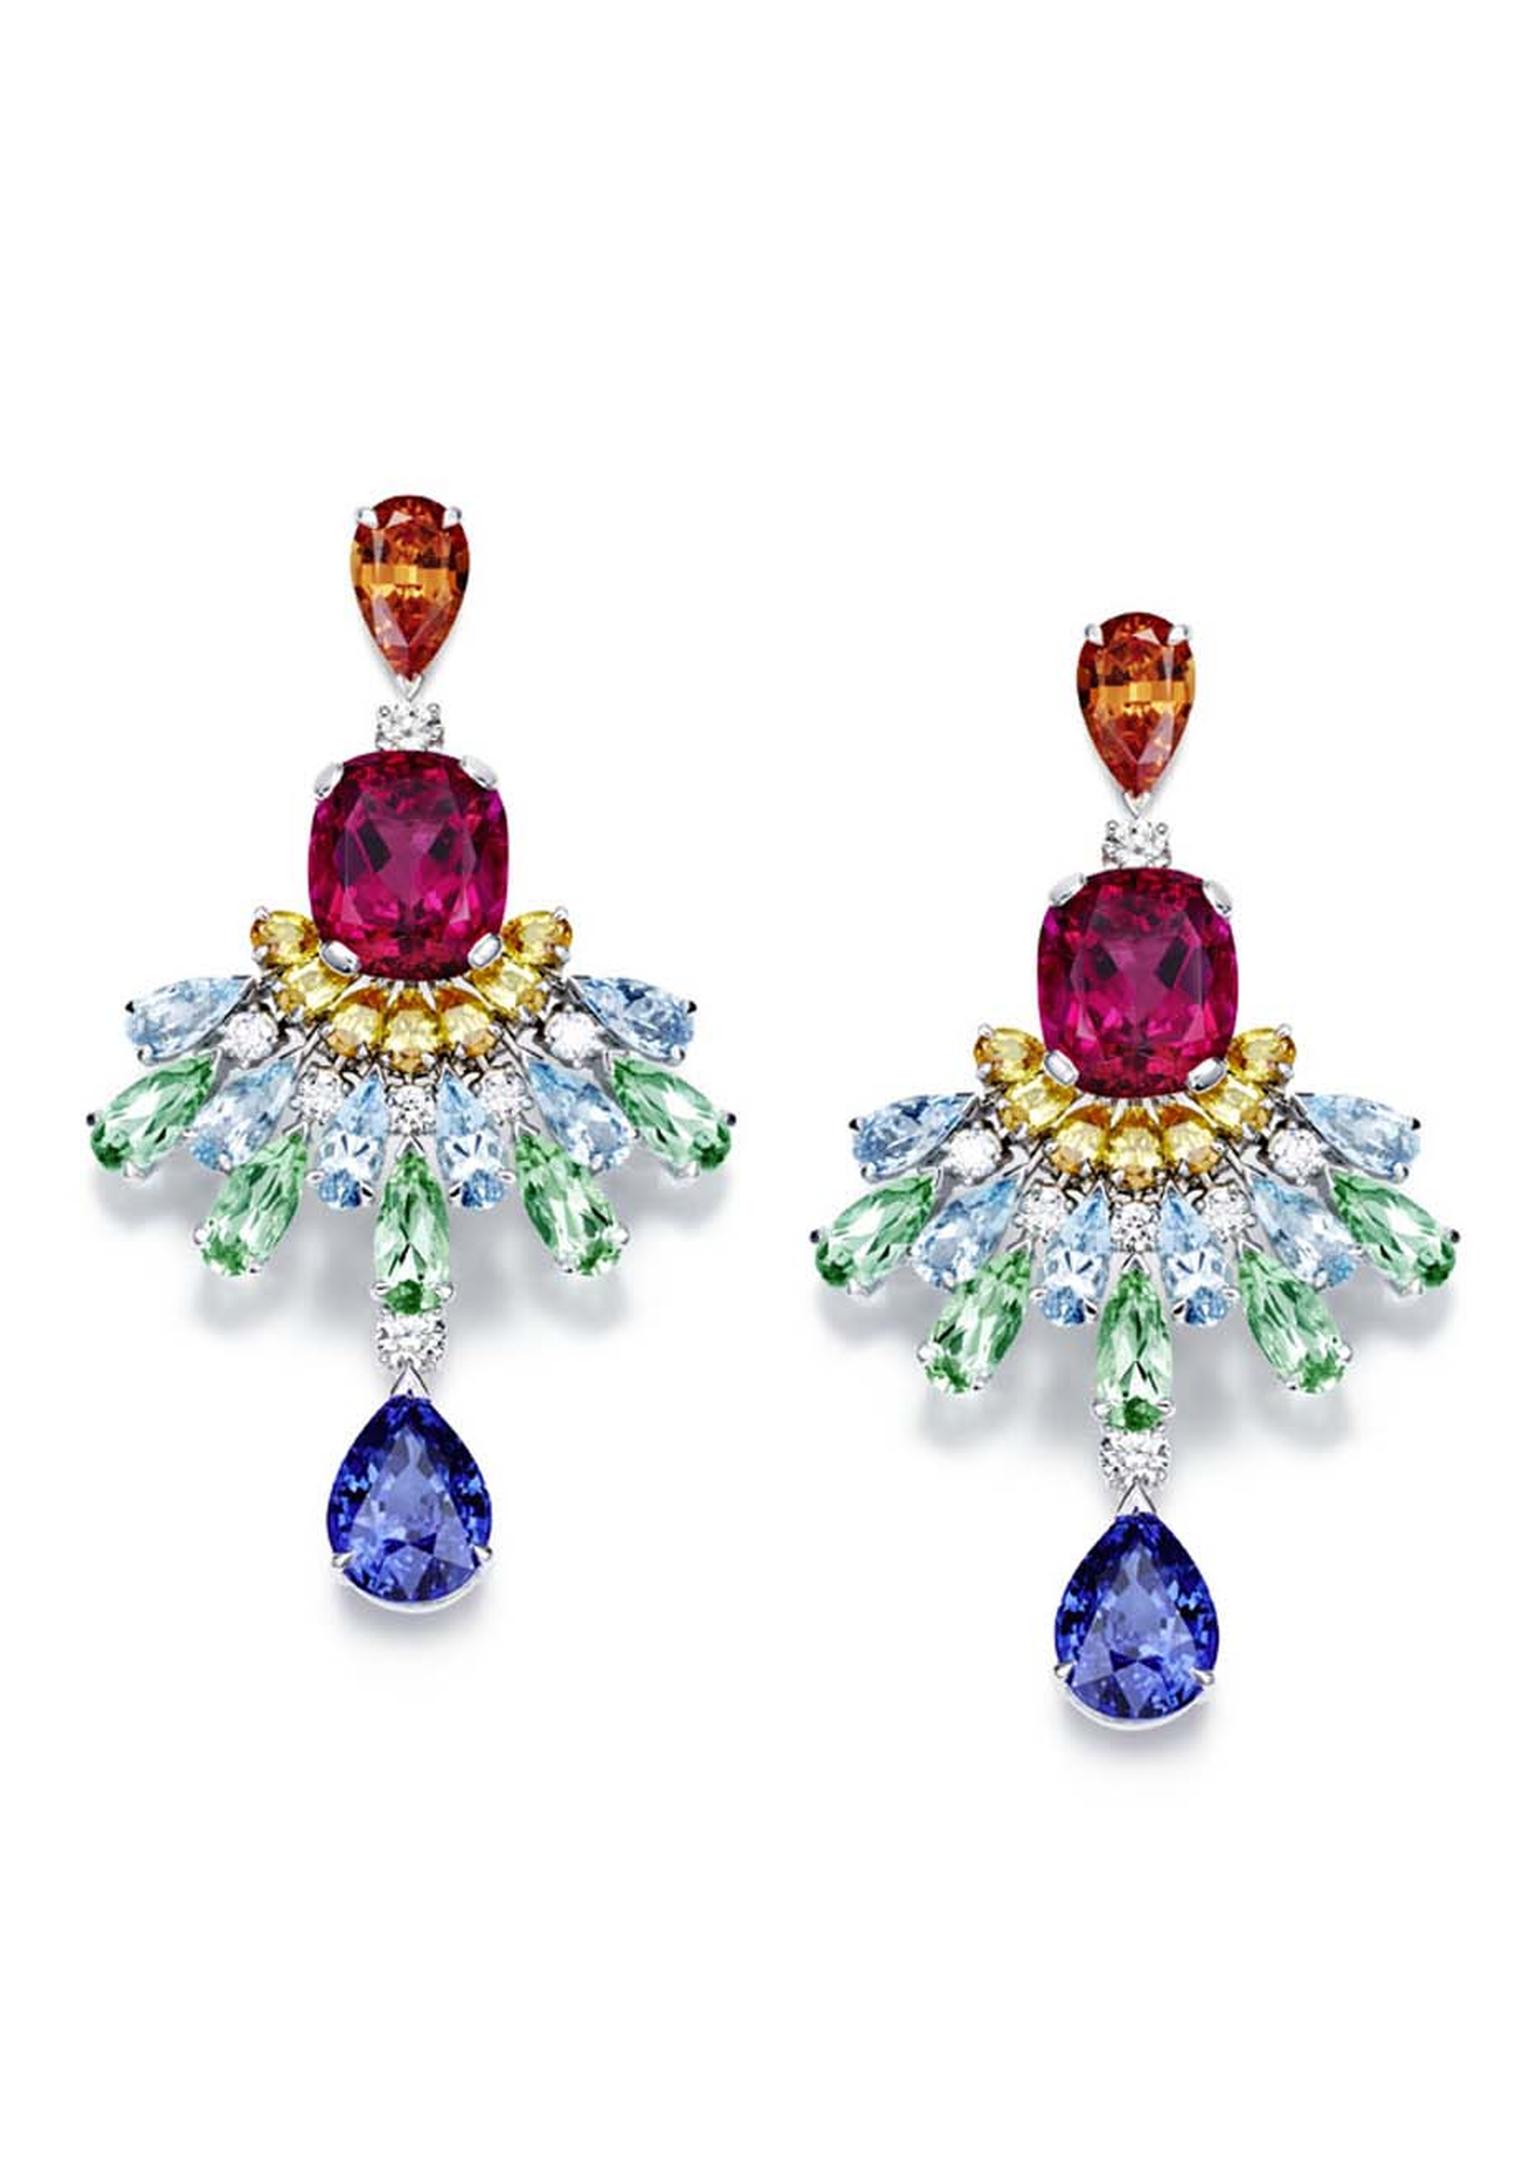 Piaget's Rose Passion earrings are set with a variety of colourful gemstones, including rubellites, topaz and aquamarines